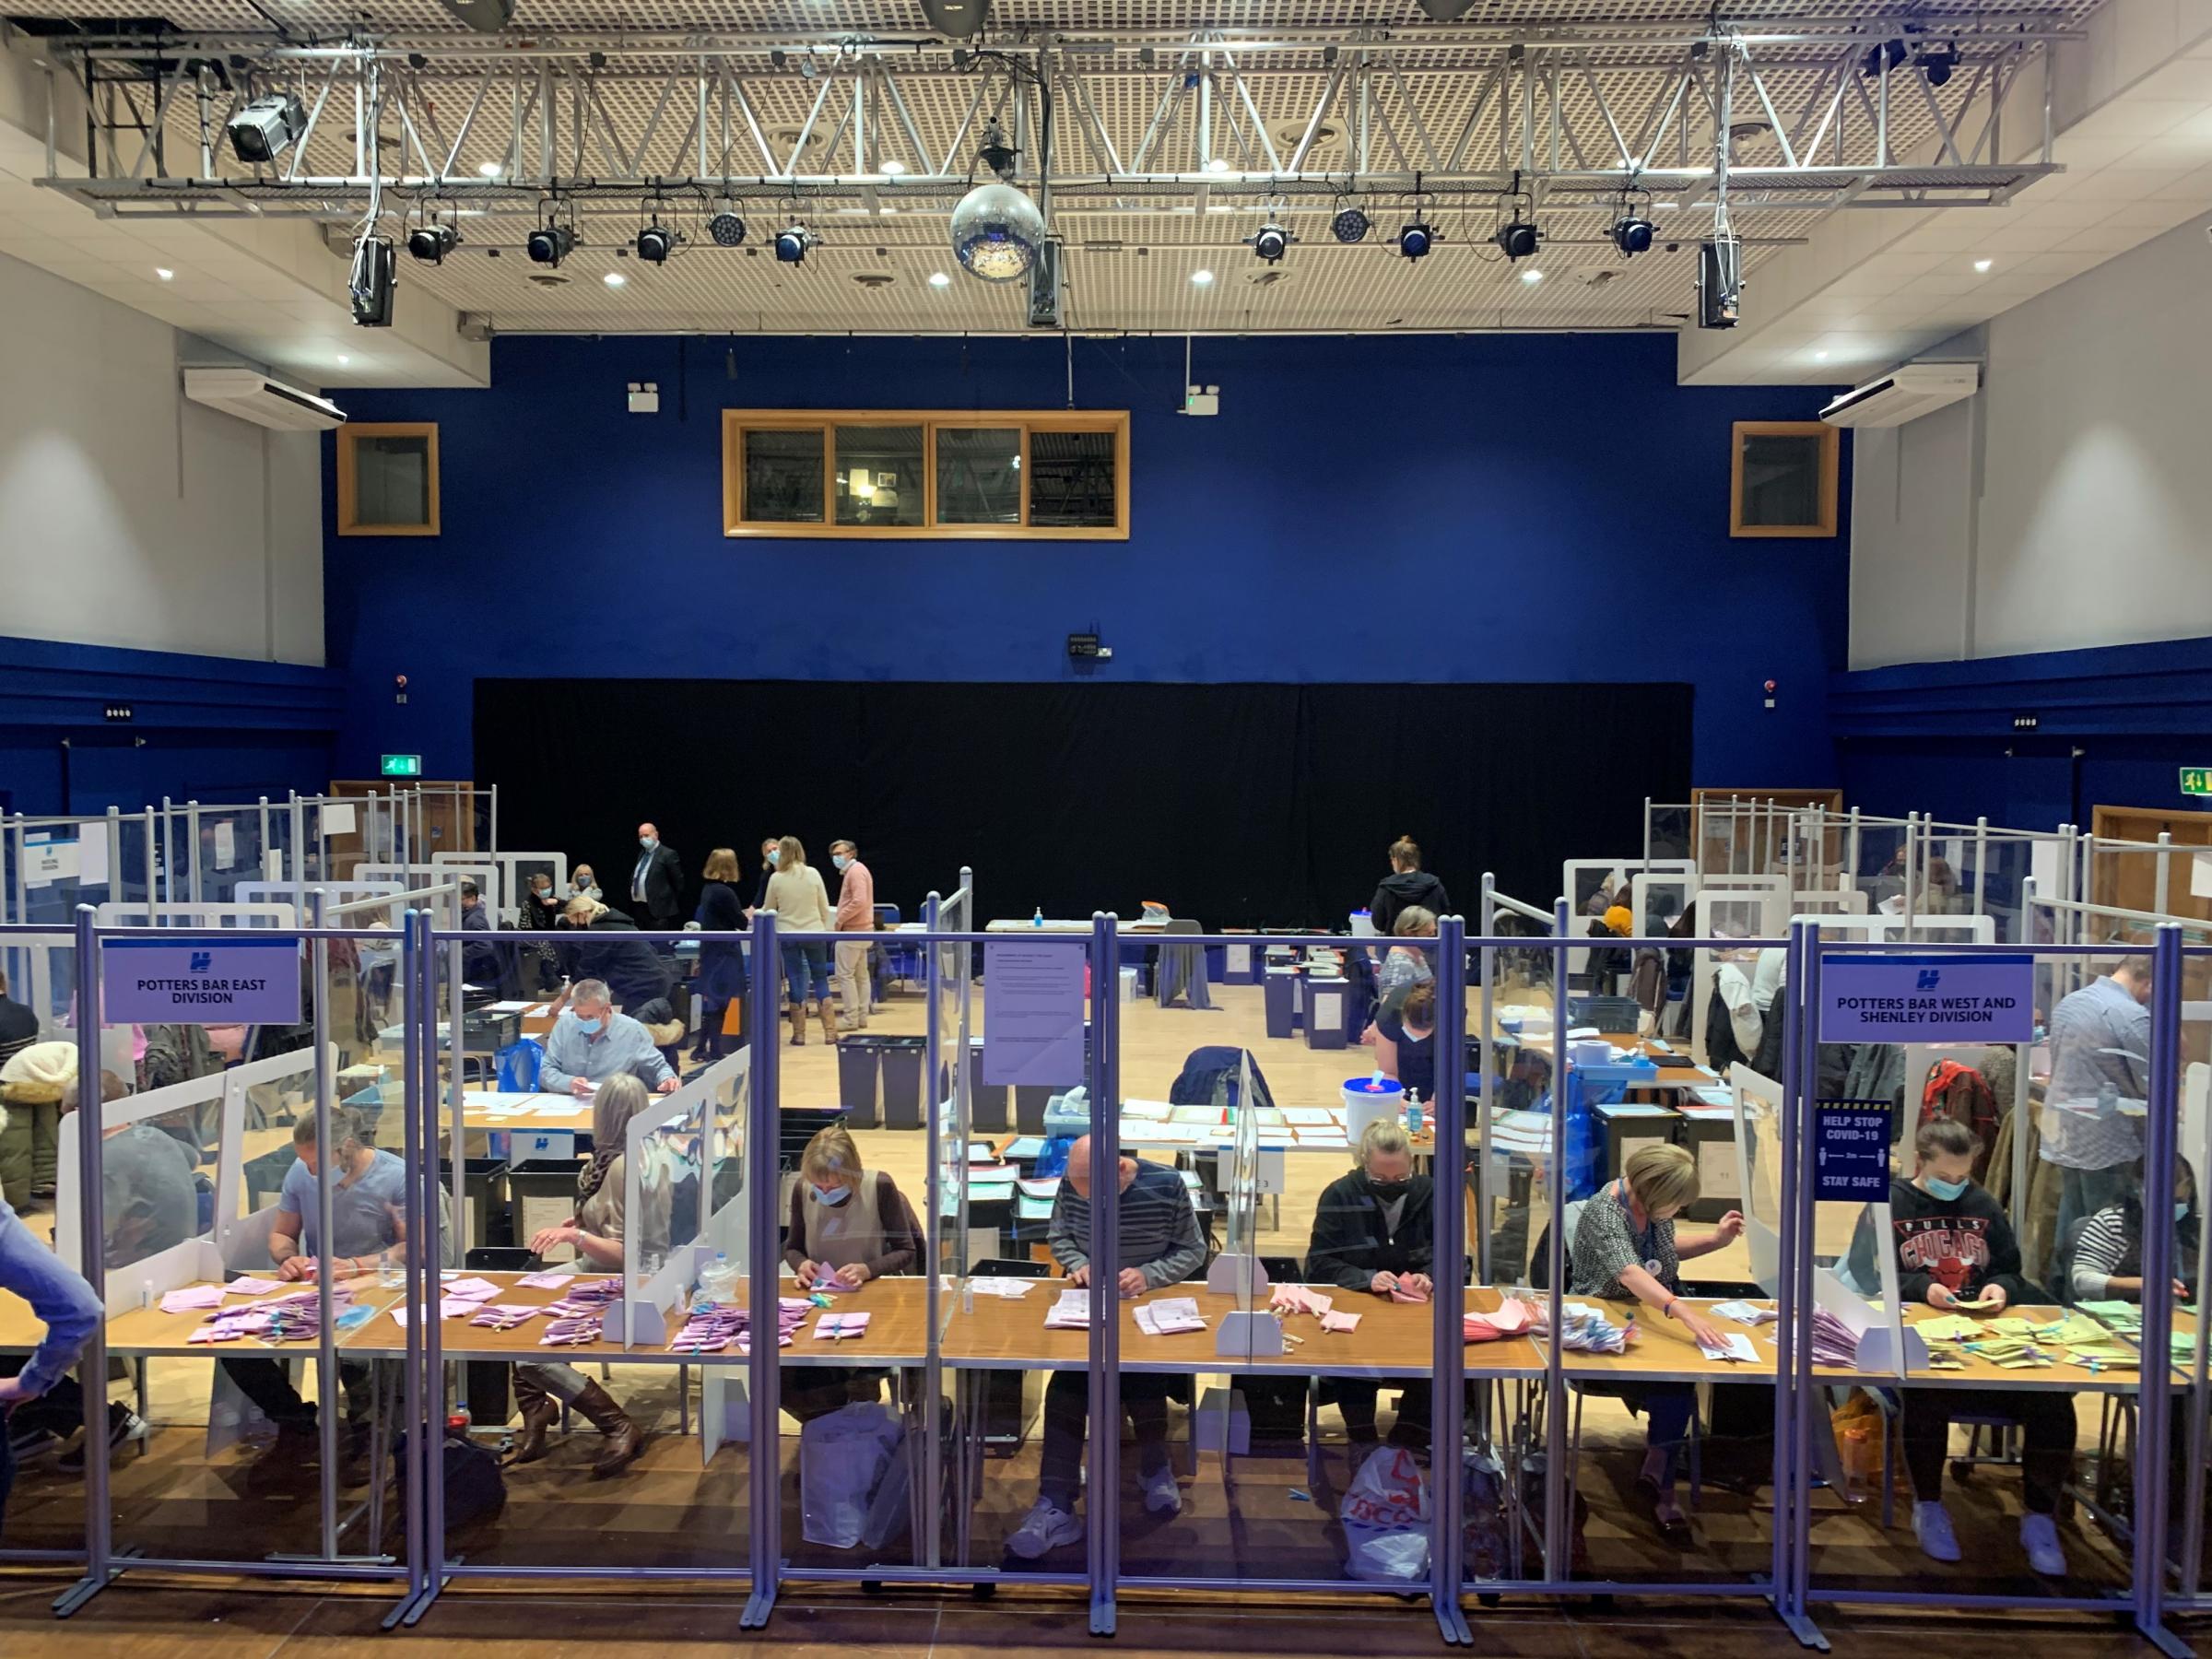 The election count for votes cast in Hertsmere was held at the Radlett Centre on Saturday